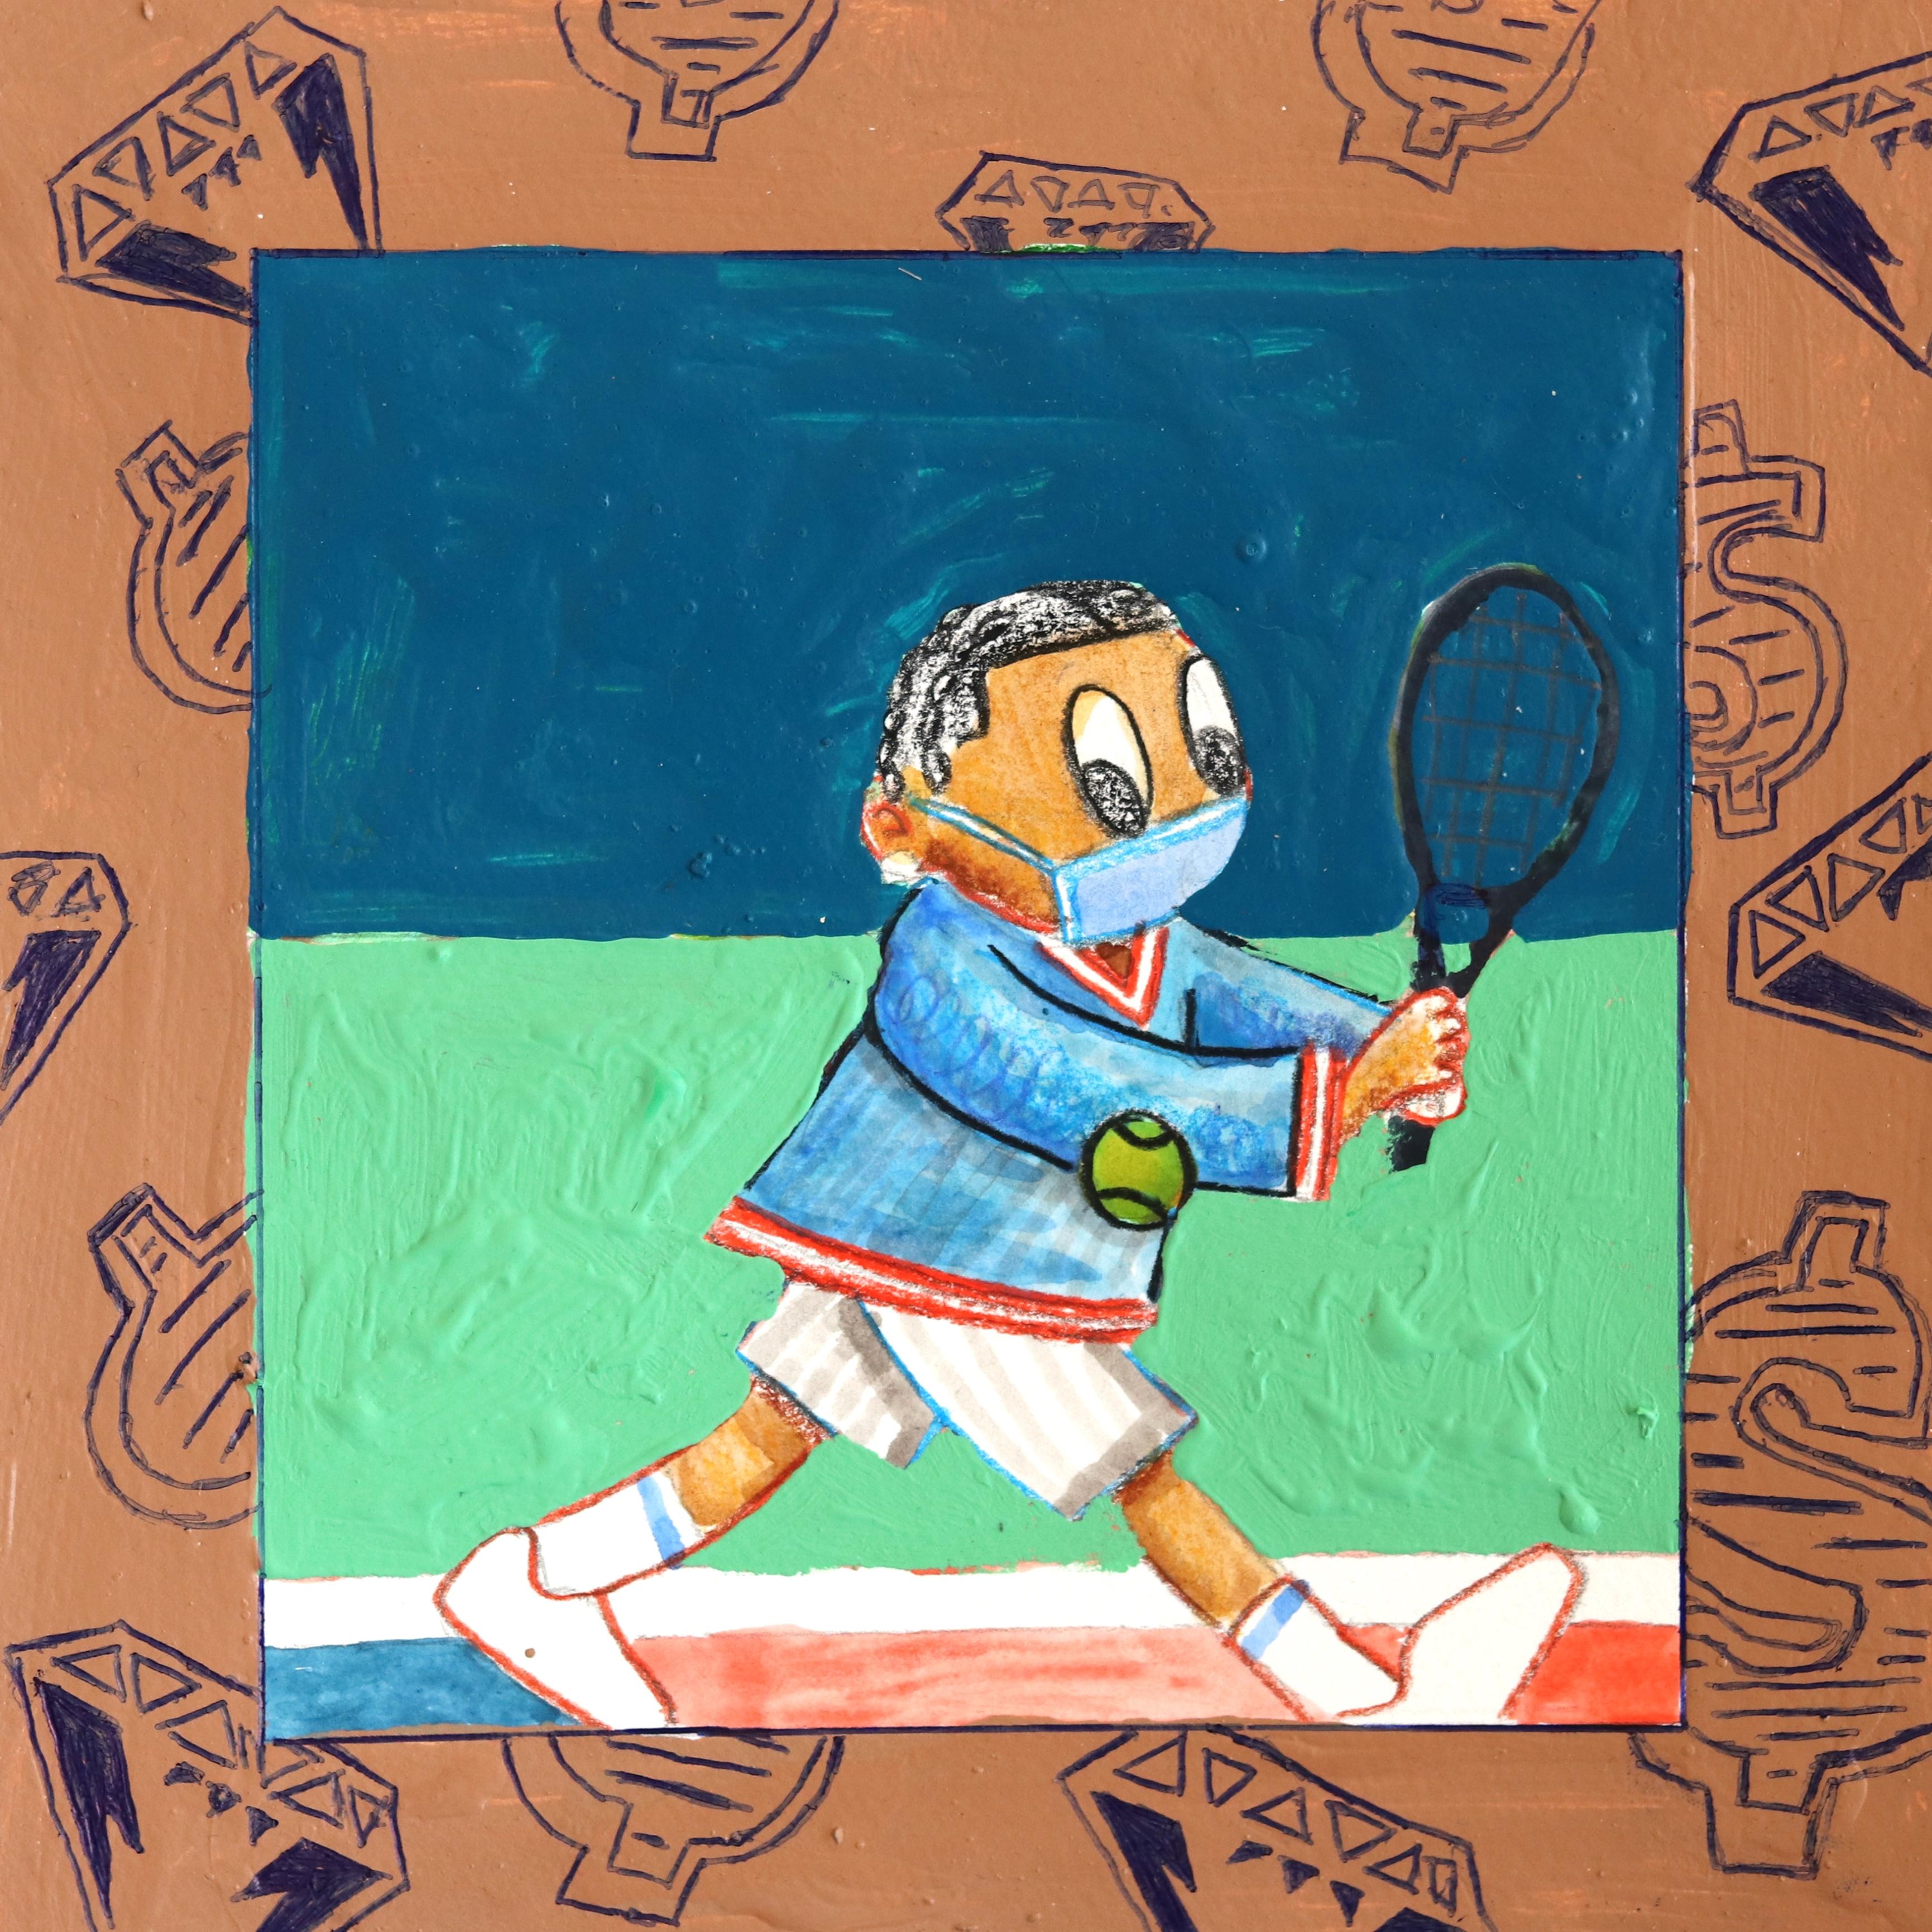 Serving - Original Contemporary Sports Inspired Tennis Painting - Mixed Media Art by Danny Brown